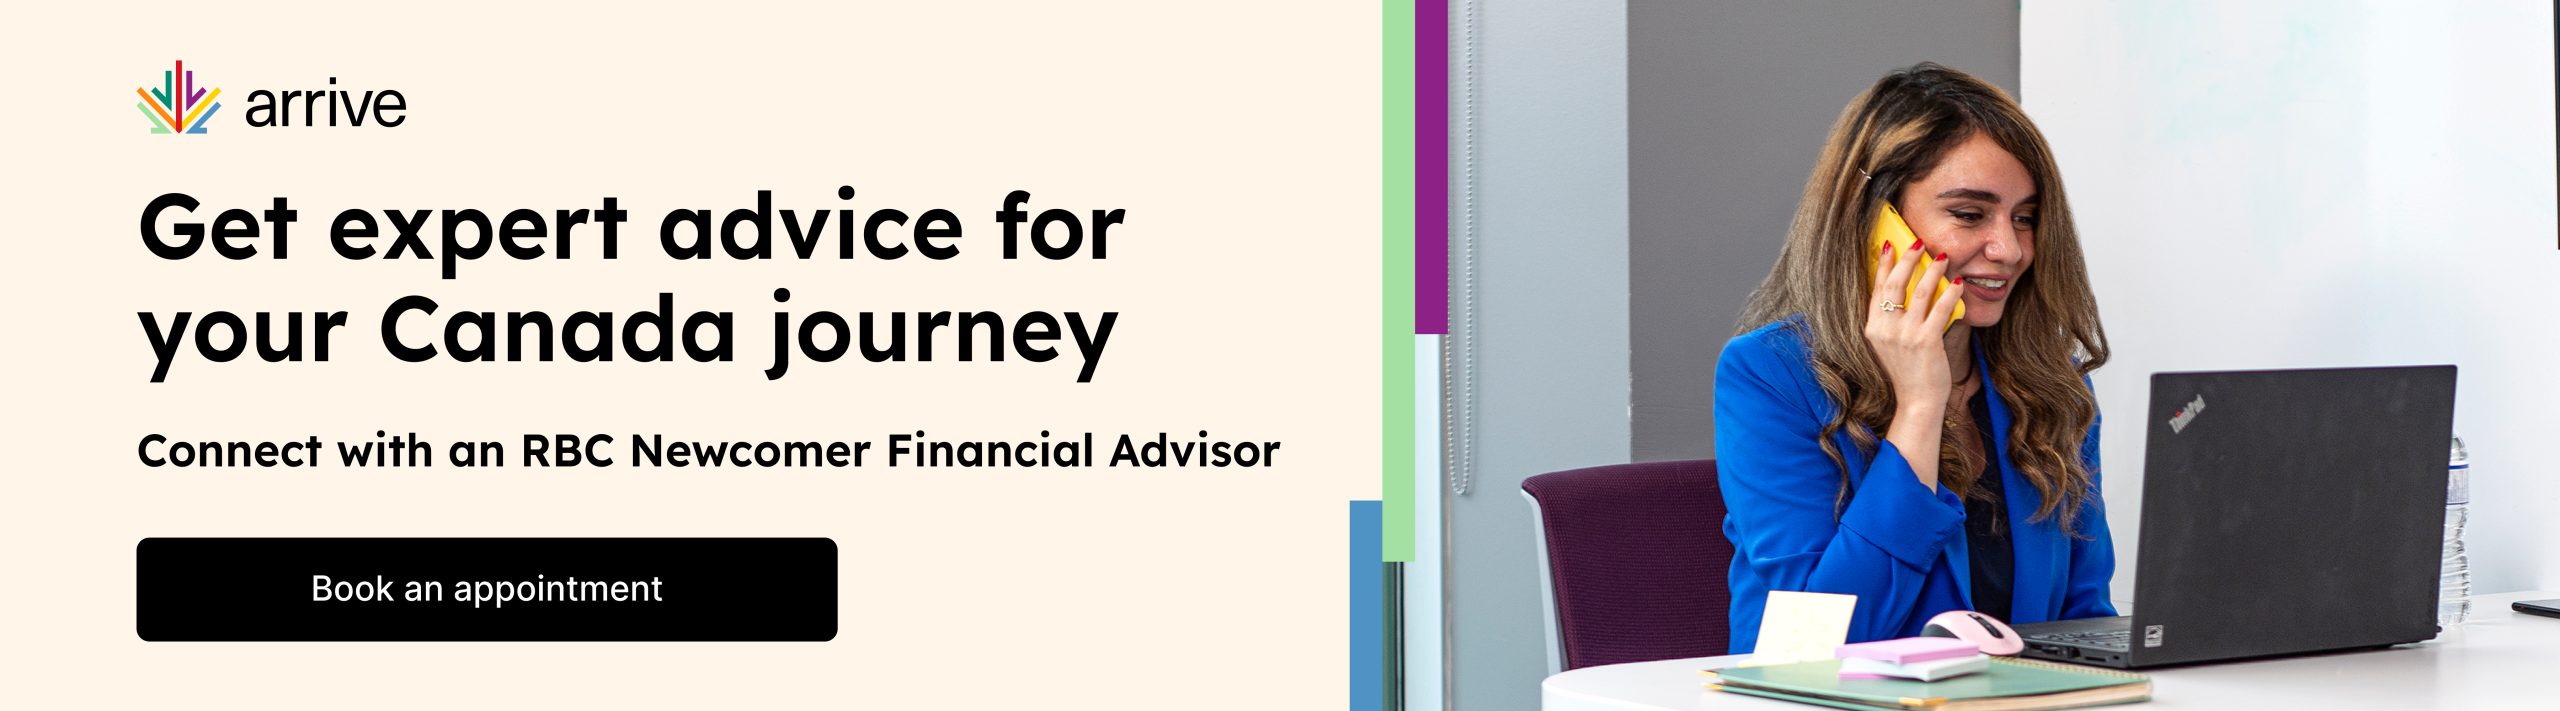 Get expert advice for your Canada journey - Connect with an RBC Newcomer Financial advisor